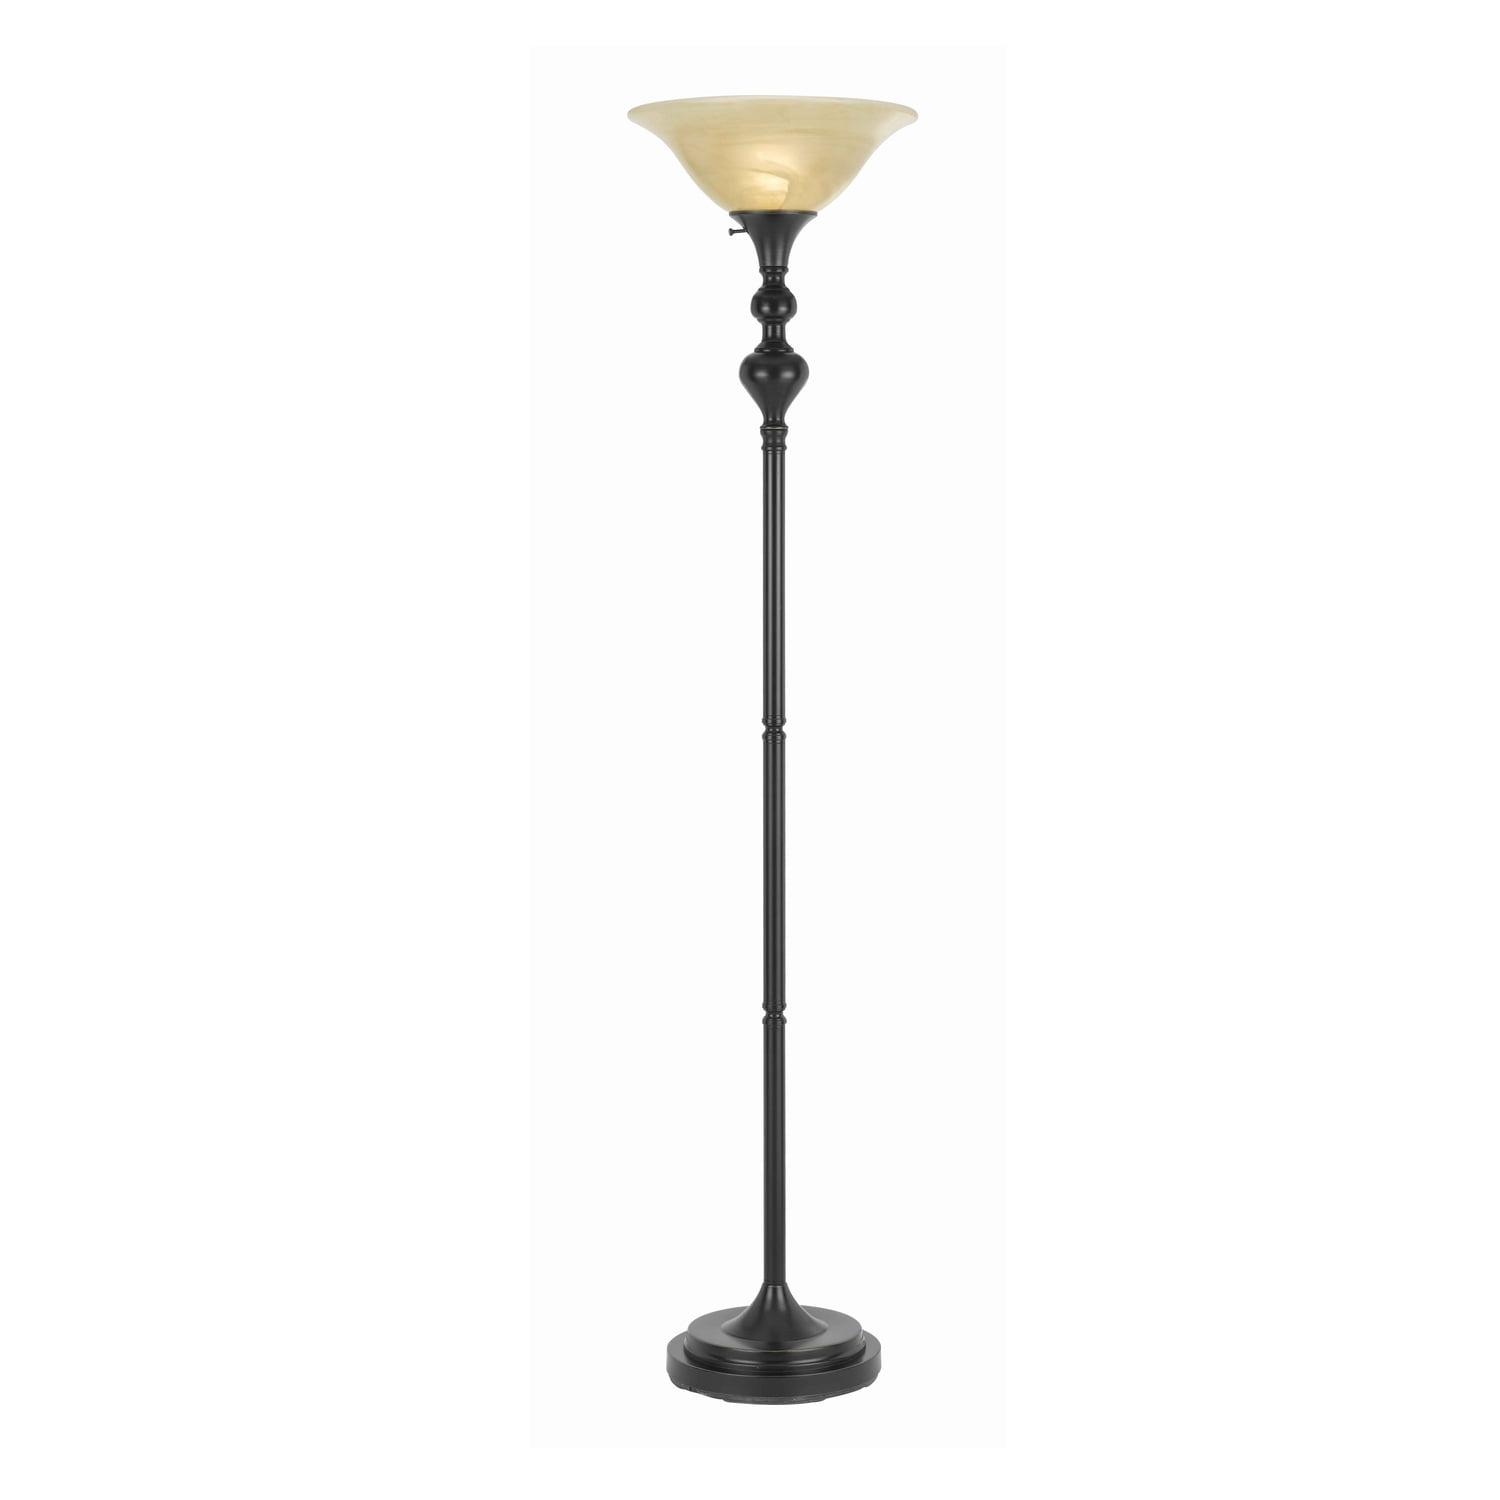 Black Metal Pedestal 71" Torchiere Floor Lamp with 3-Way Glass Shade